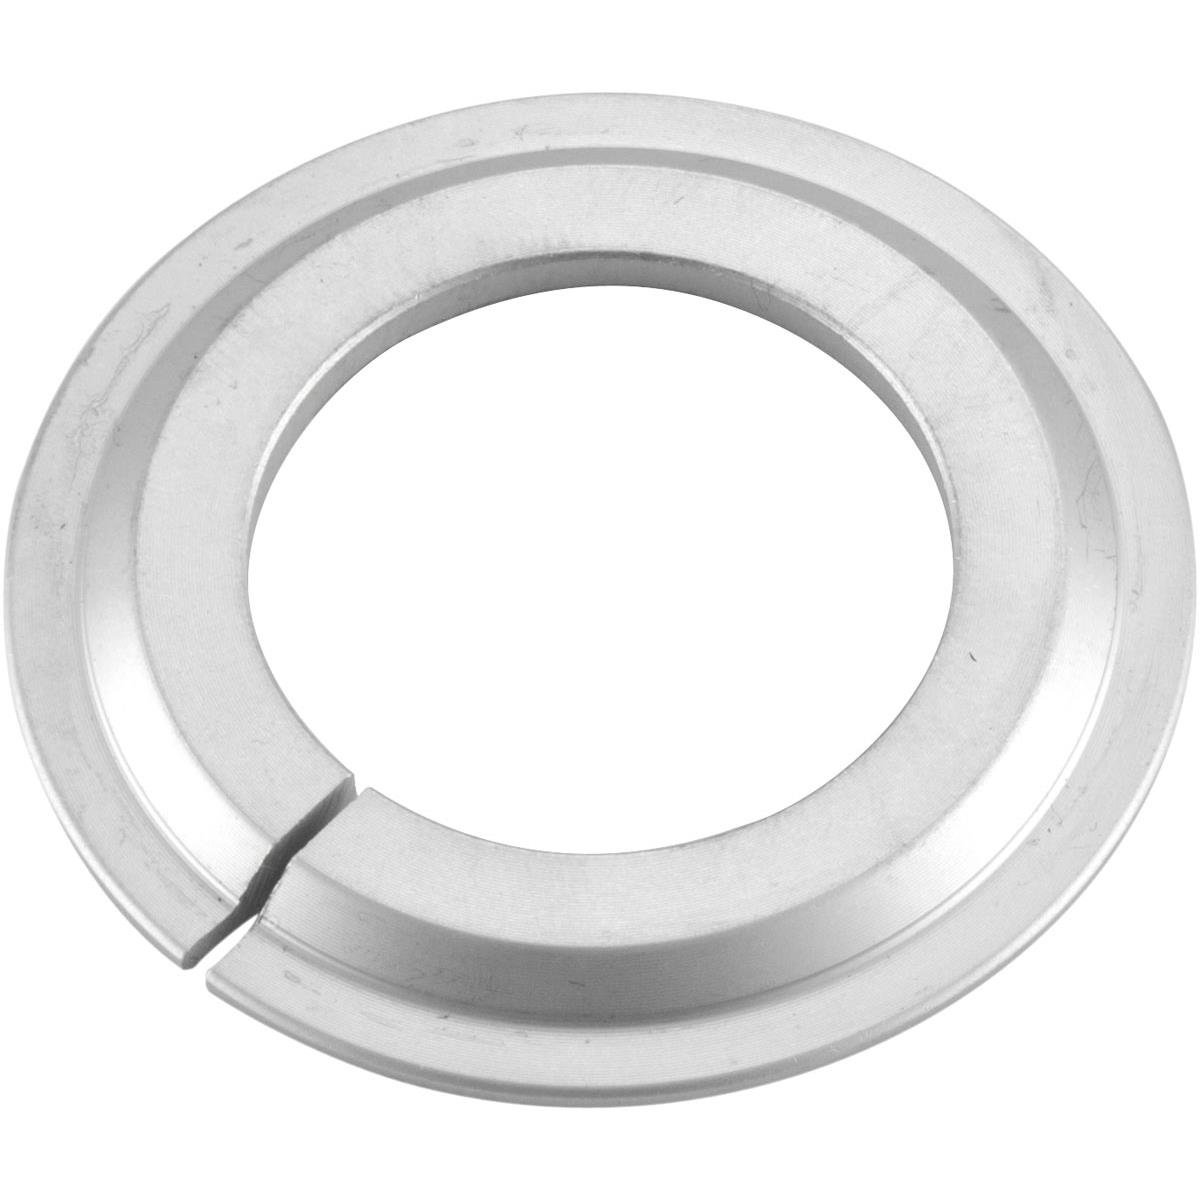 Reverse Components Reducing Cone Ring Twister 1.5 to 1 1/8 Inch